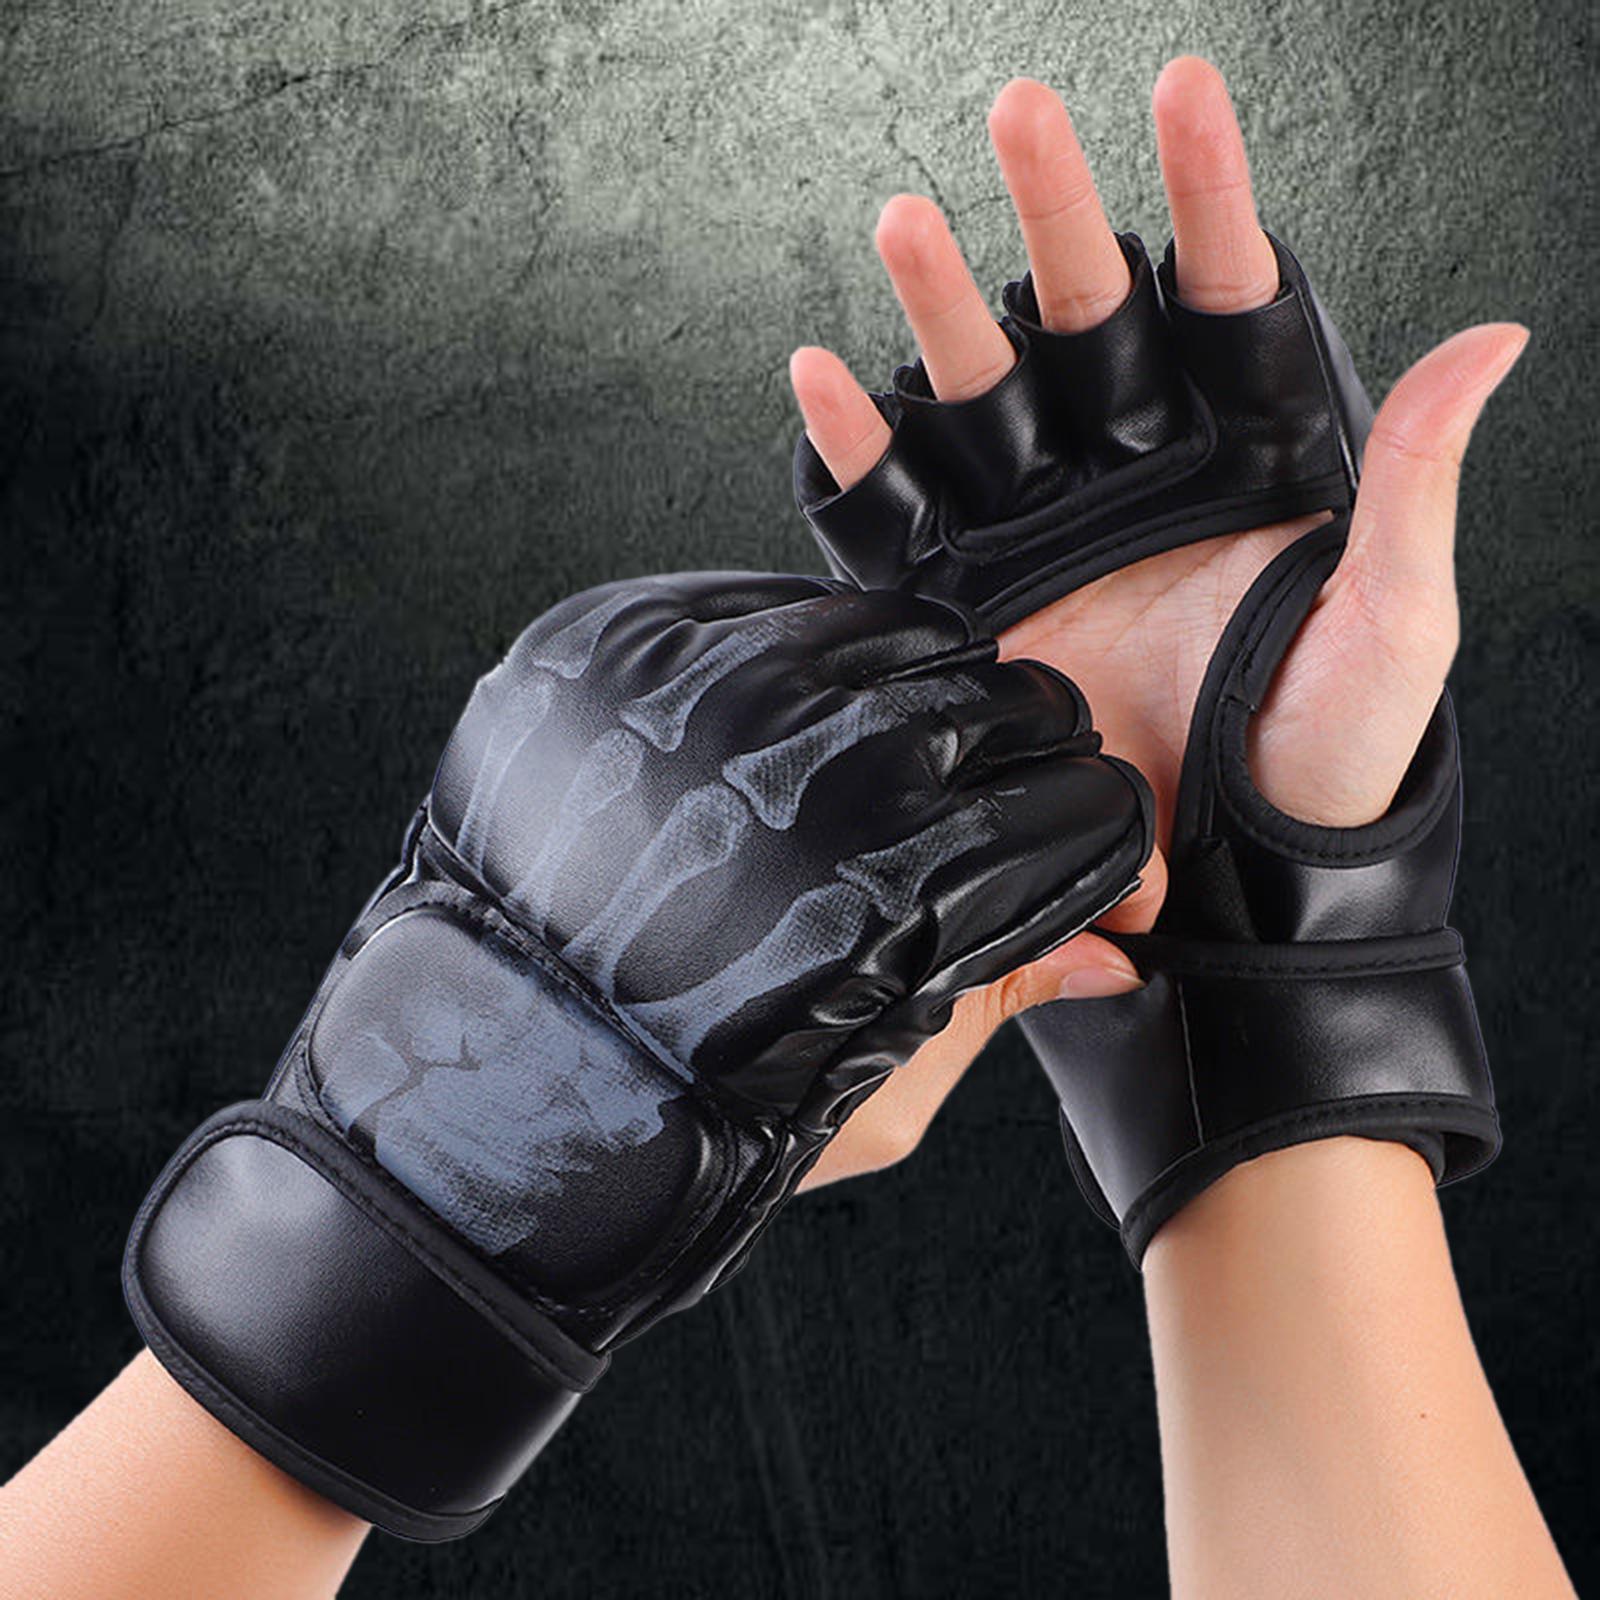 Boxing Gloves Breathable Protective Gear for Men Women Punching Bag Sparring Demon Hand Black